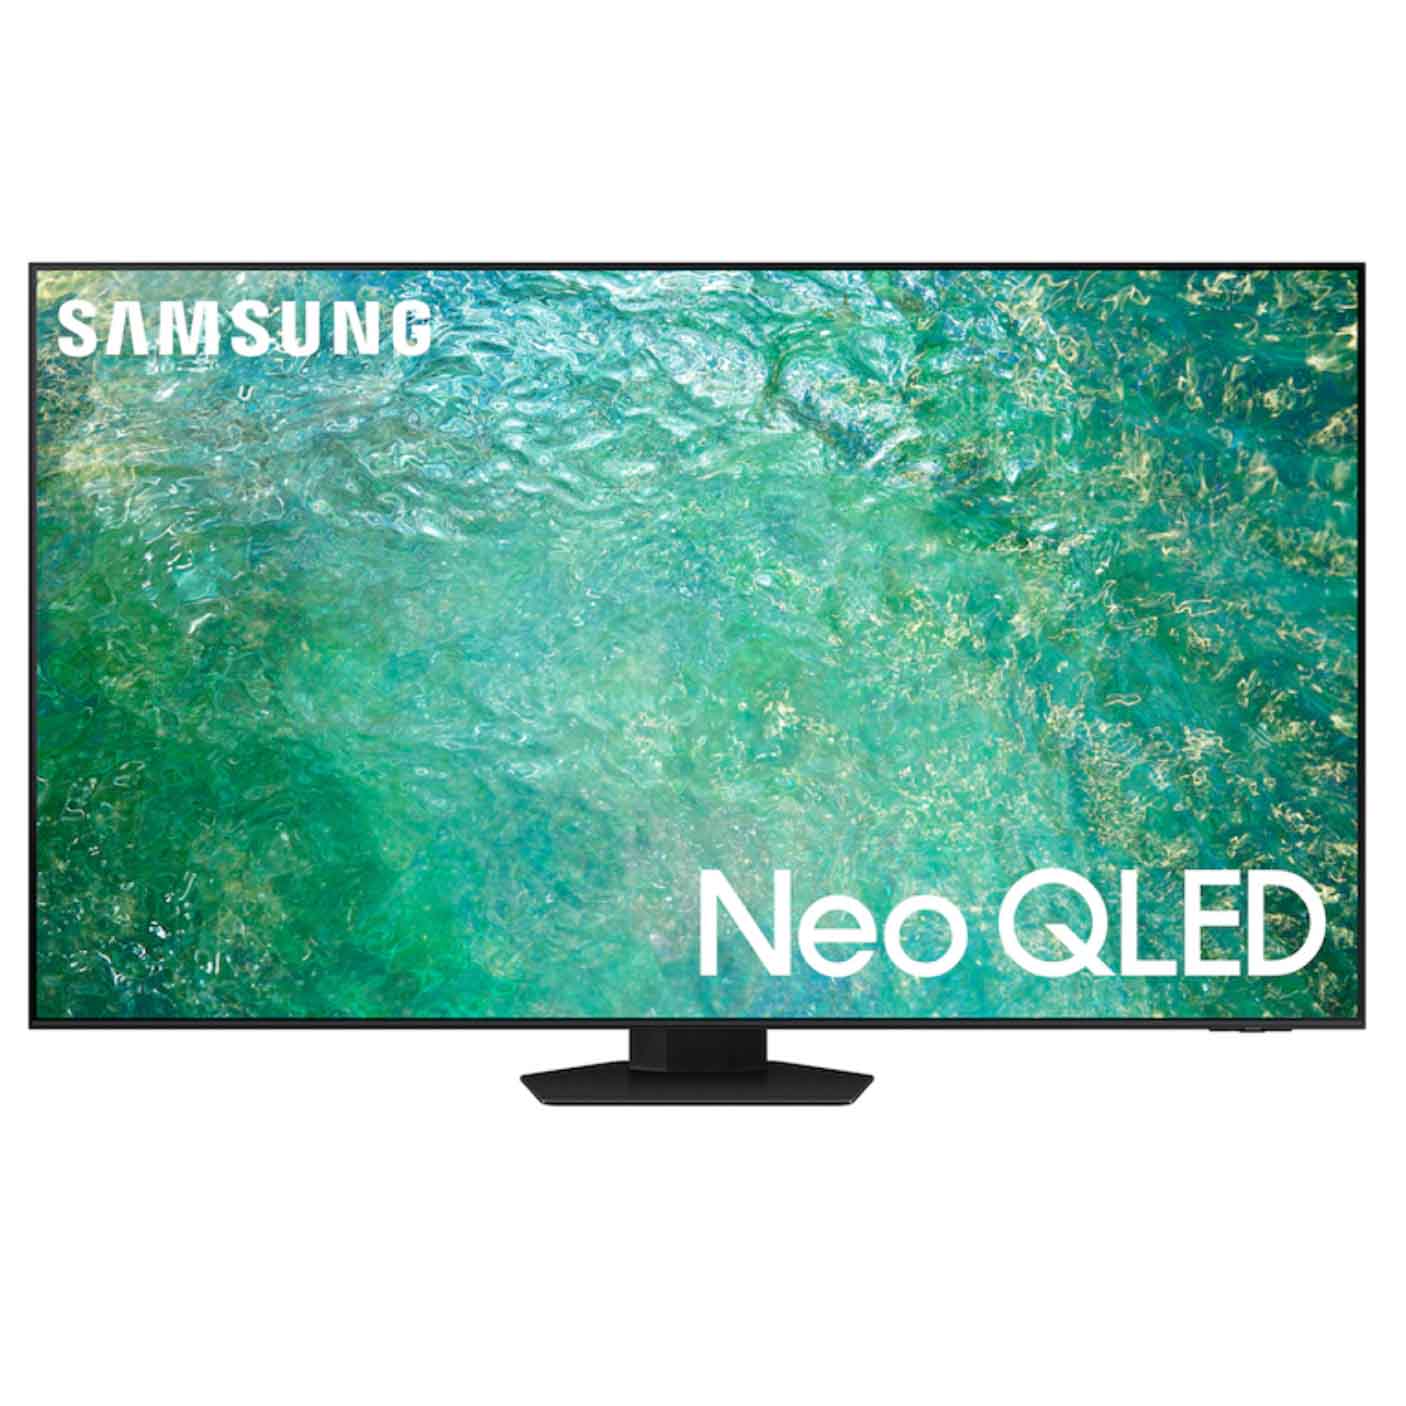 Samsung NEO QLED TV with screen display